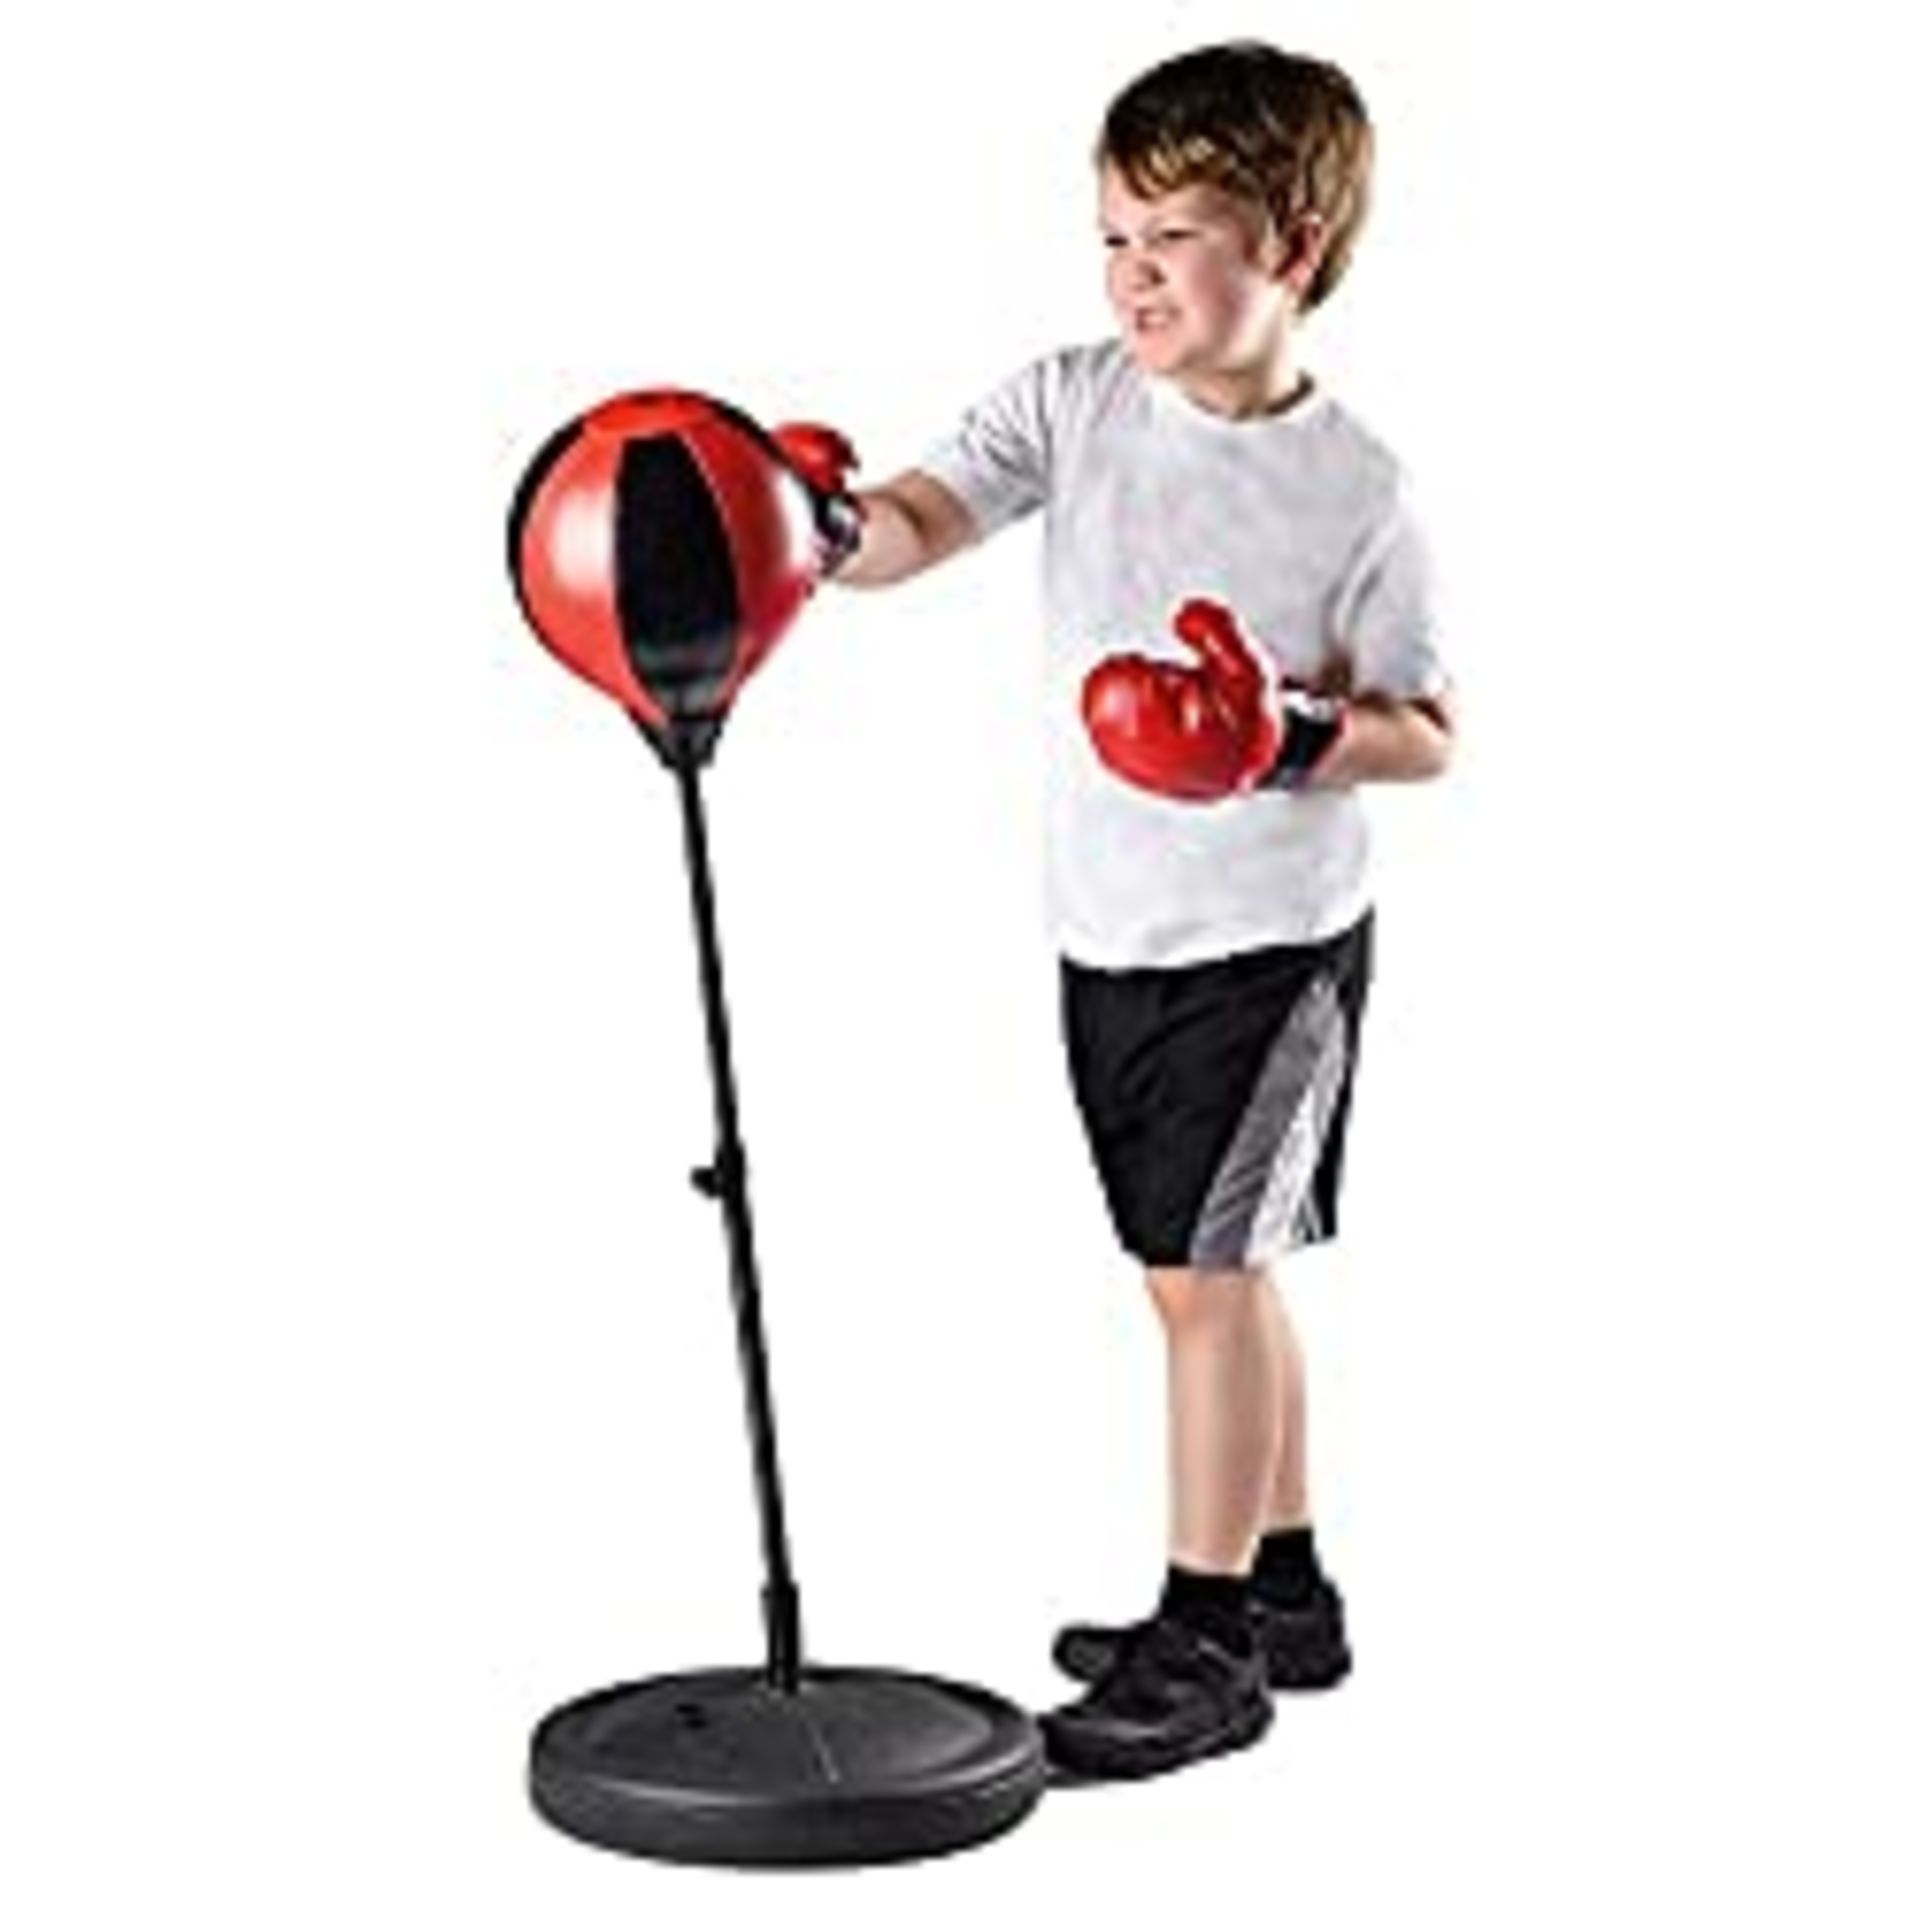 RRP £19.99 Toyrific Kids Punch Ball with Gloves, 72 - 108cm Boxing Bag Set